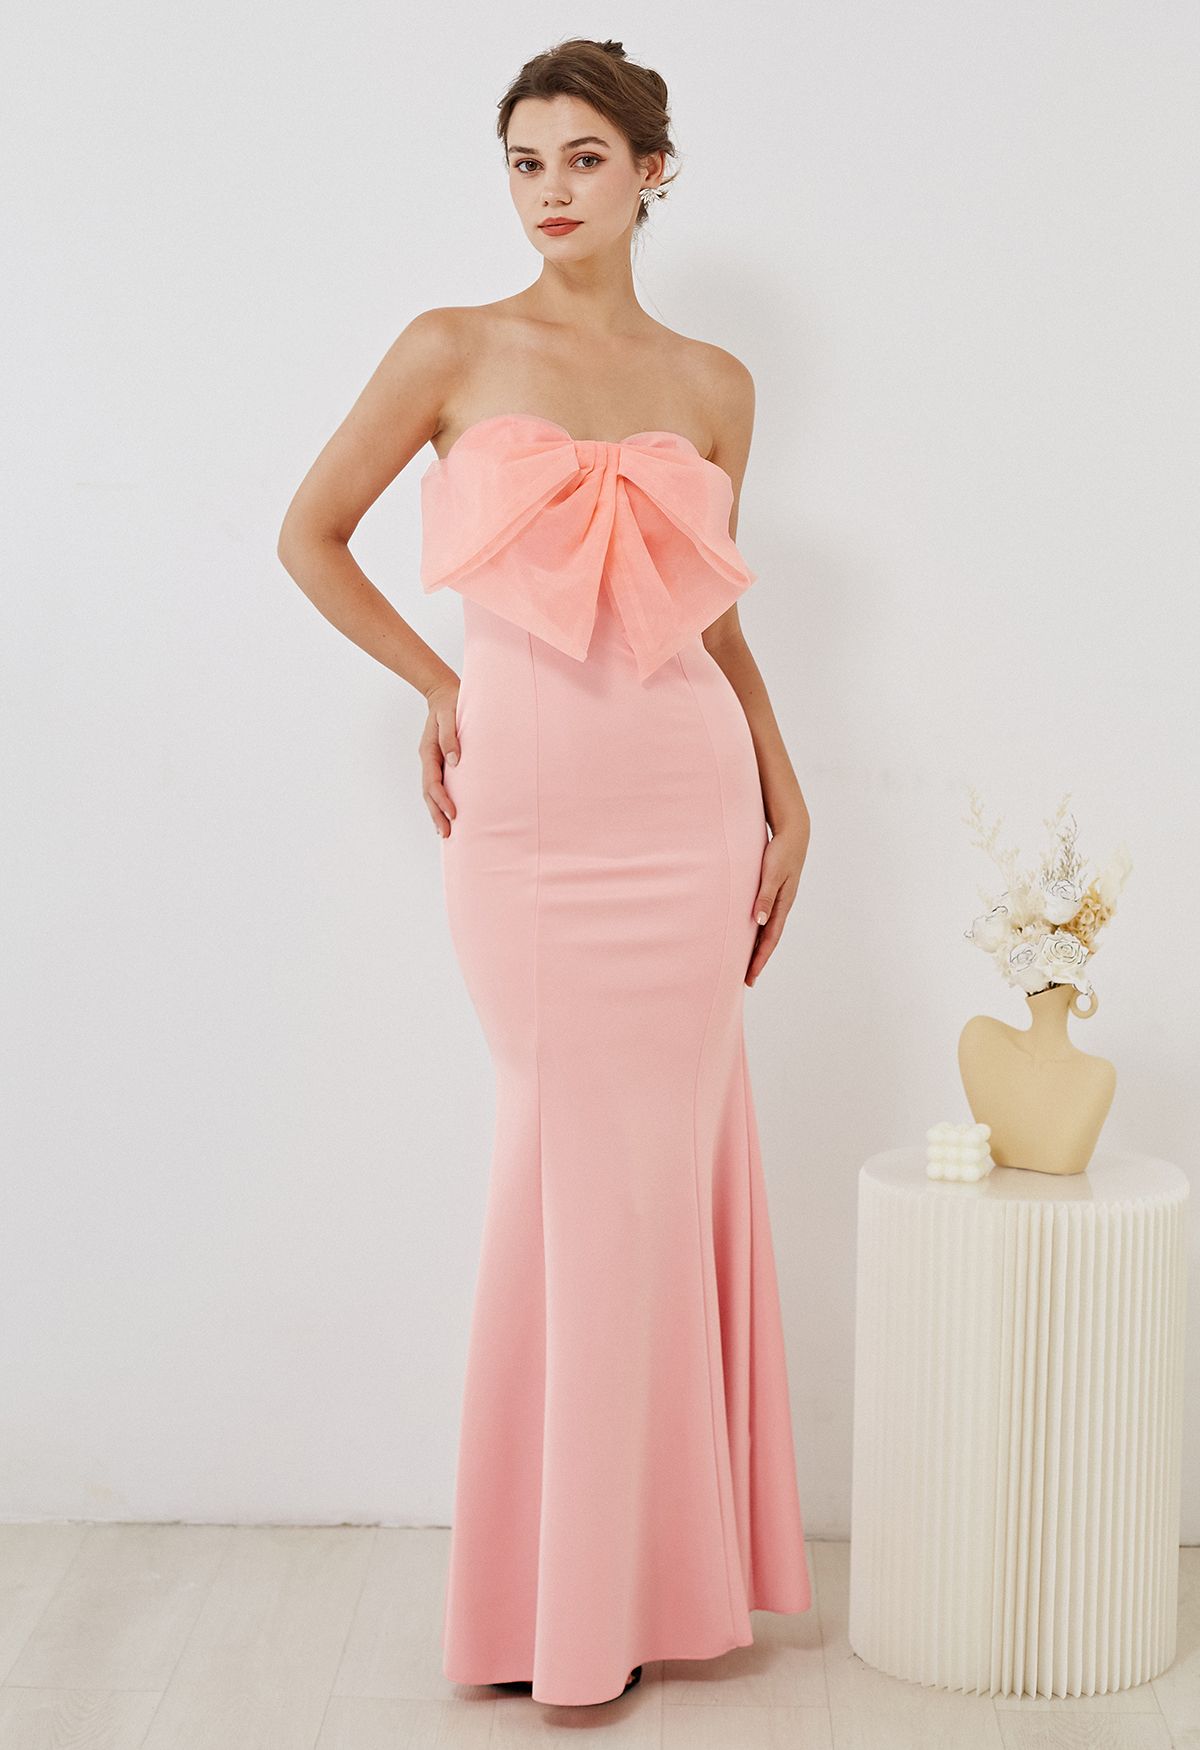 Bowknot Strapless Mermaid Gown in Pink